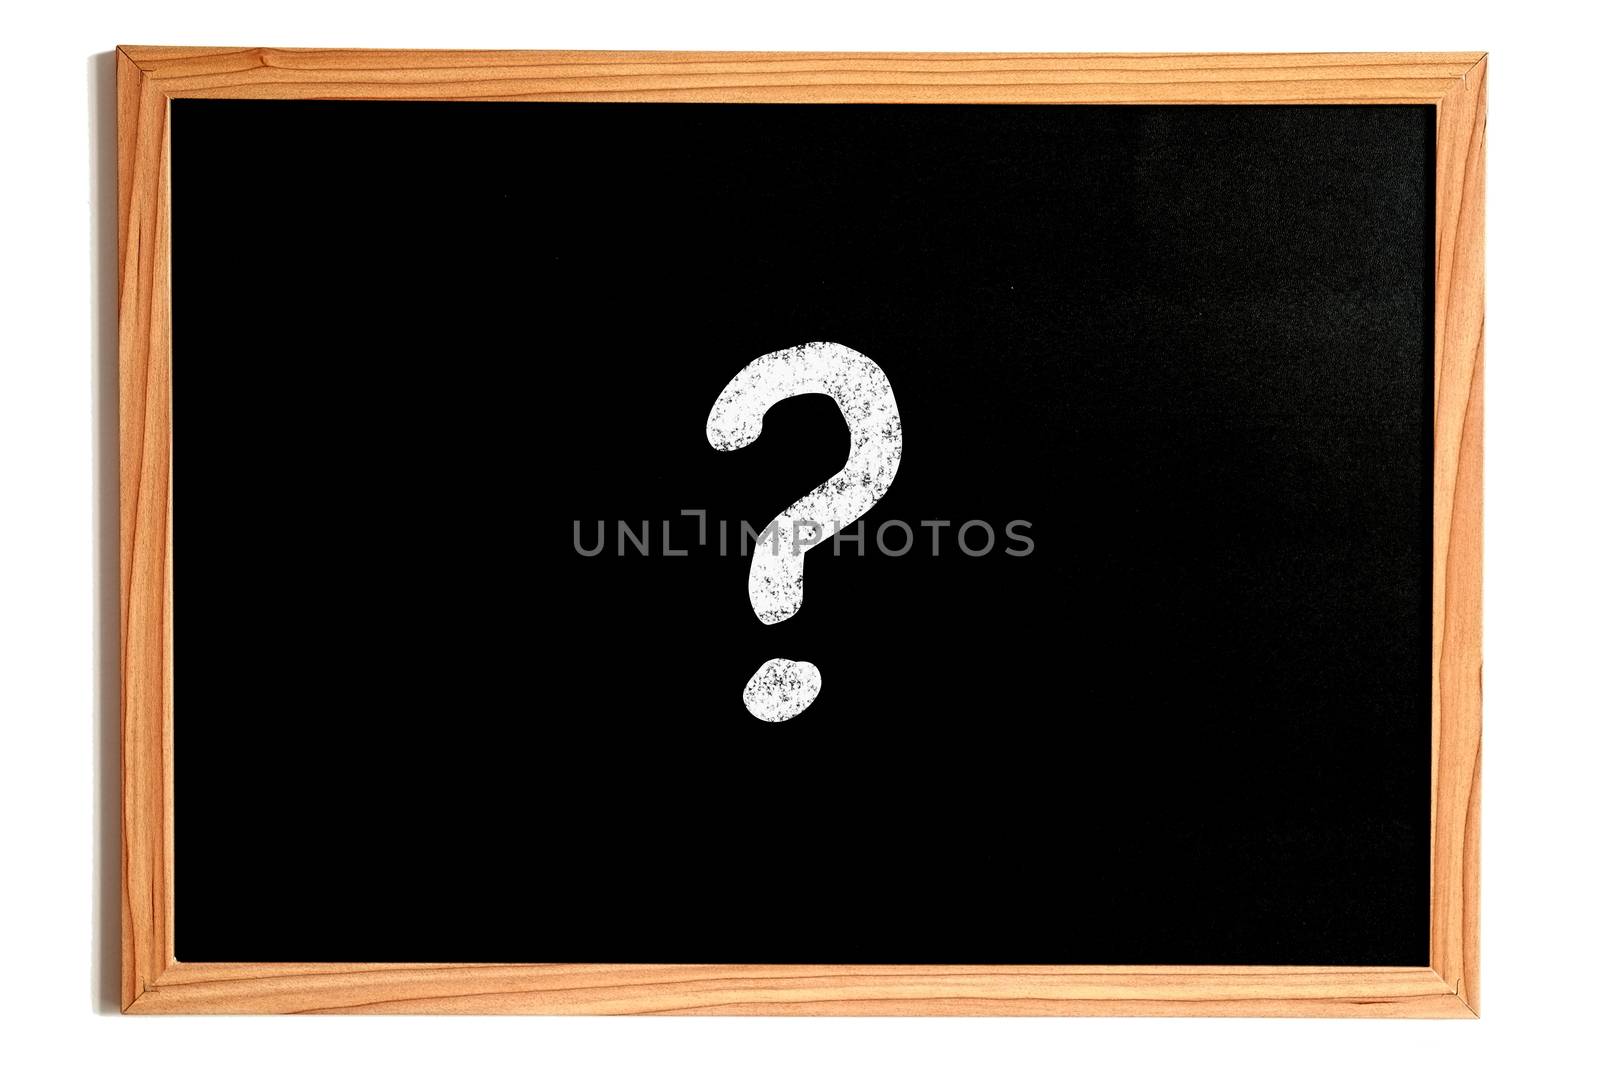 One Single Question Mark Chalk Text on Chalkboard with Wooden Frame Isolated on White